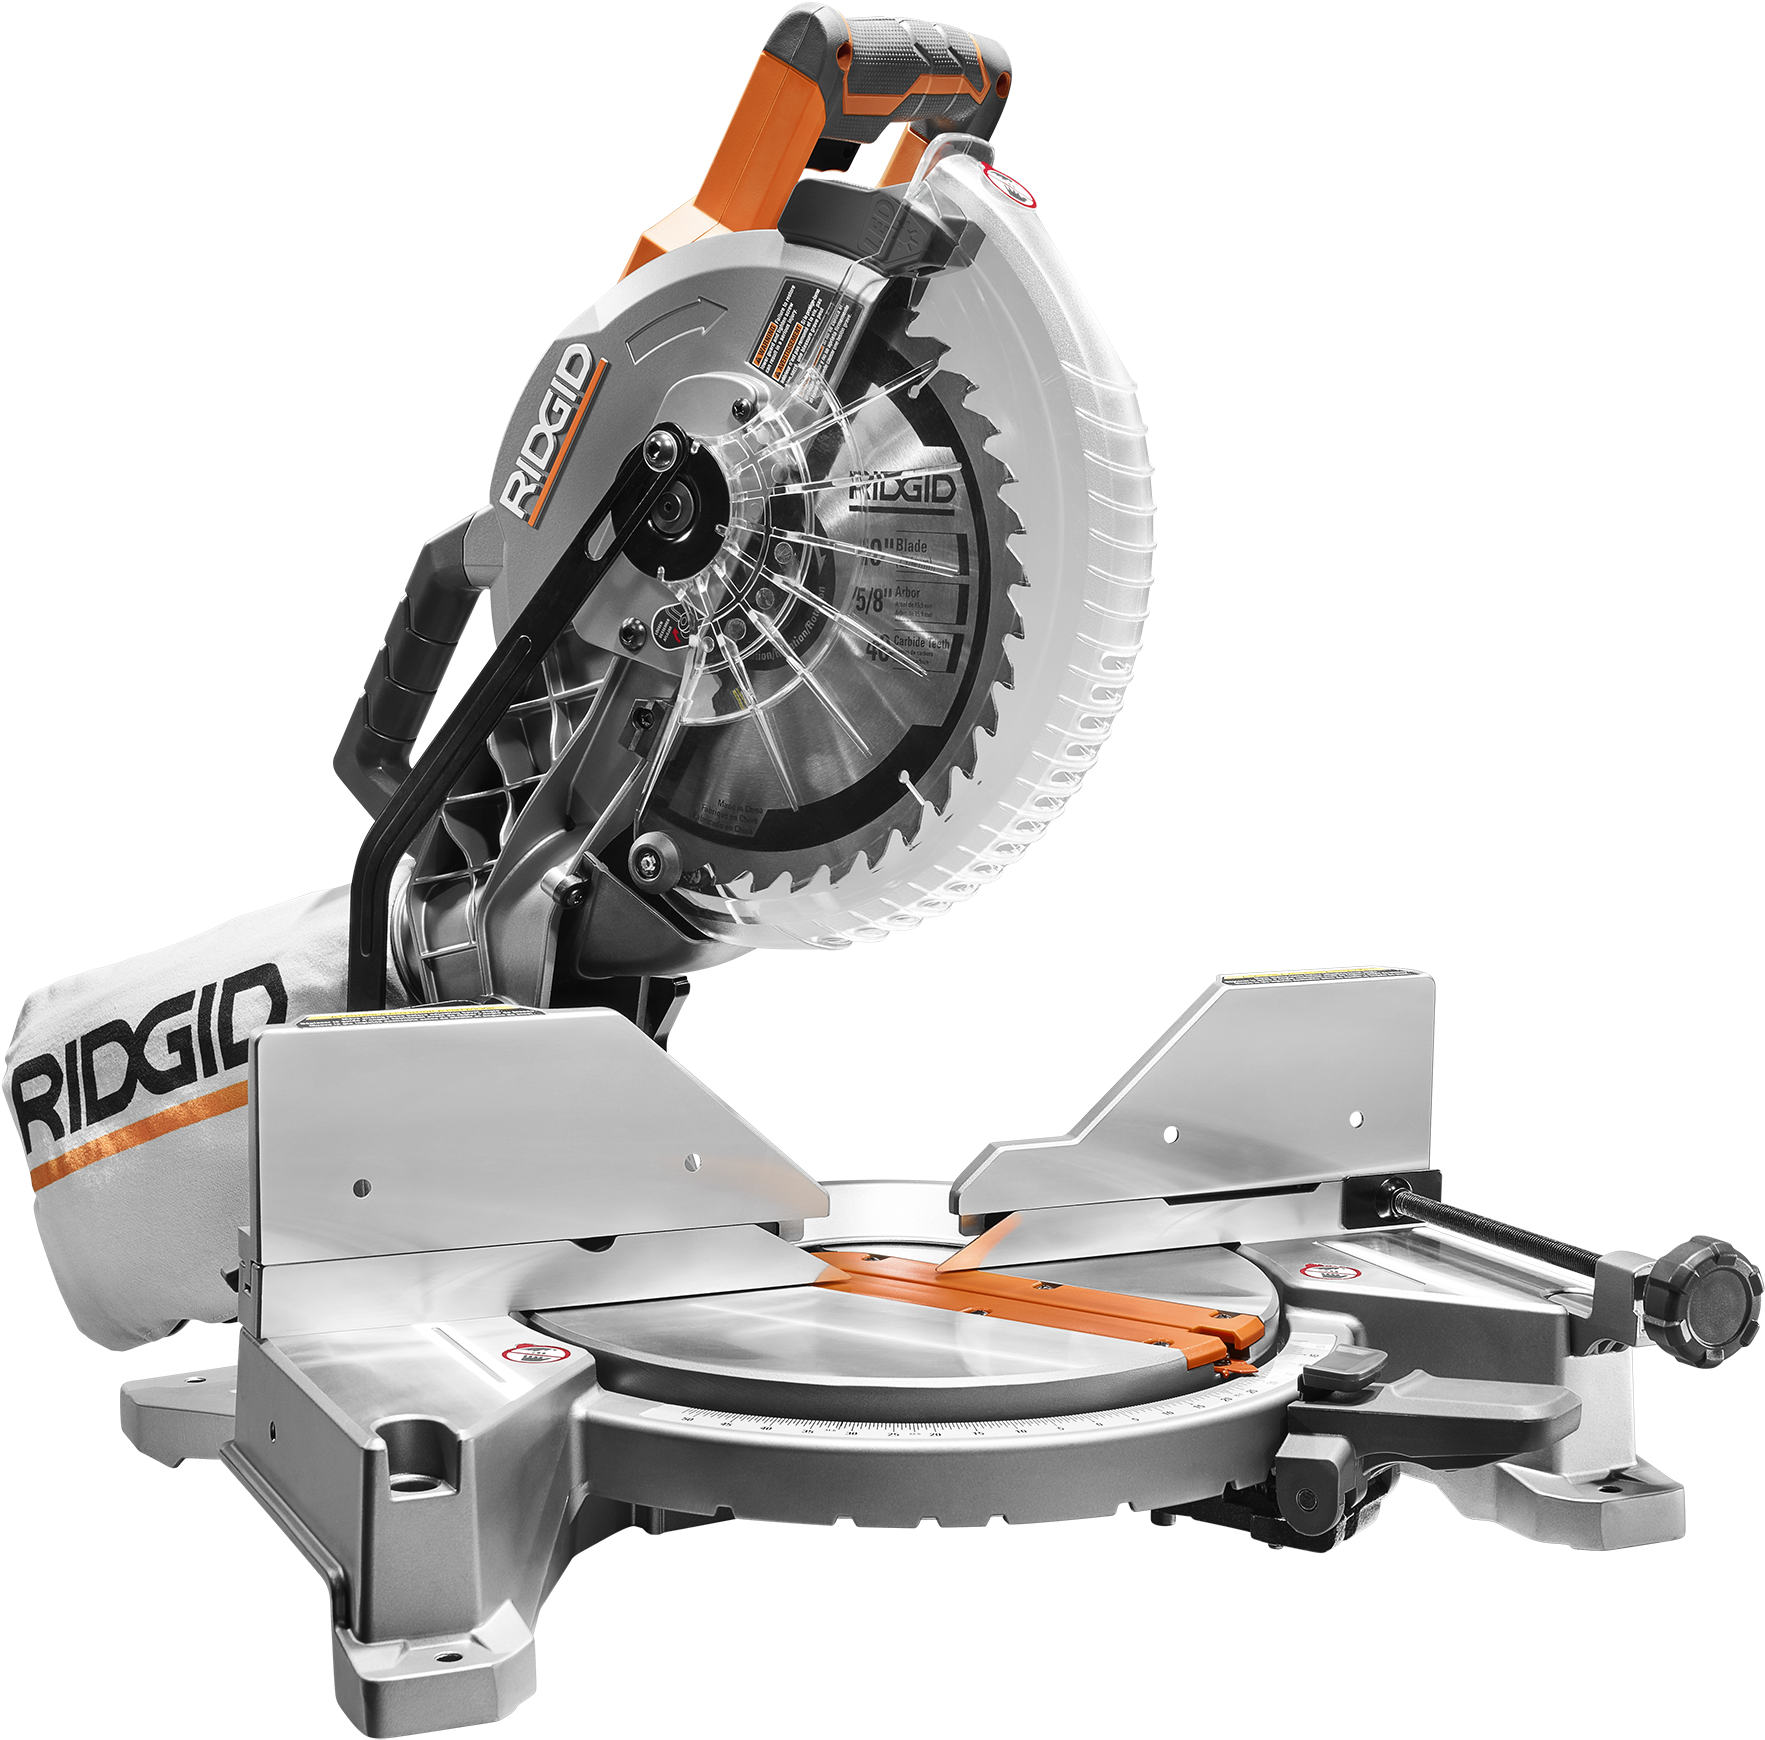 Download Jobmax Ridgid Miter Saw Png Image With No Background Pngkey Com